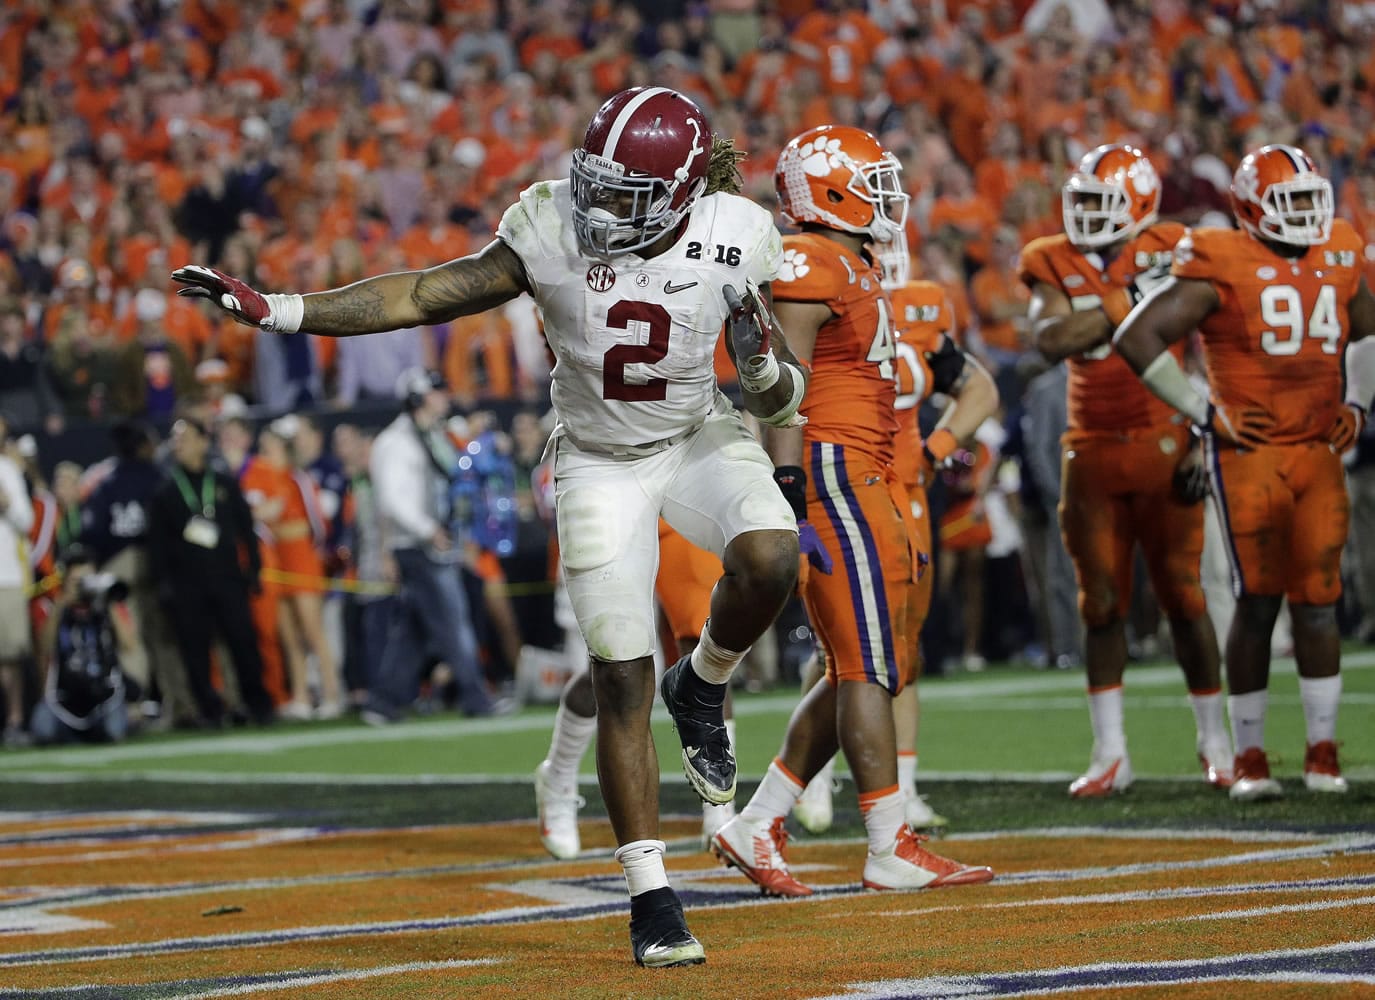 Alabama's Derrick Henry gives a Heisman pose after rushing for a touchdown during the second half of the NCAA college football playoff championship game against Clemson Monday, Jan. 11, 2016, in Glendale, Ariz. (AP Photo/David J.